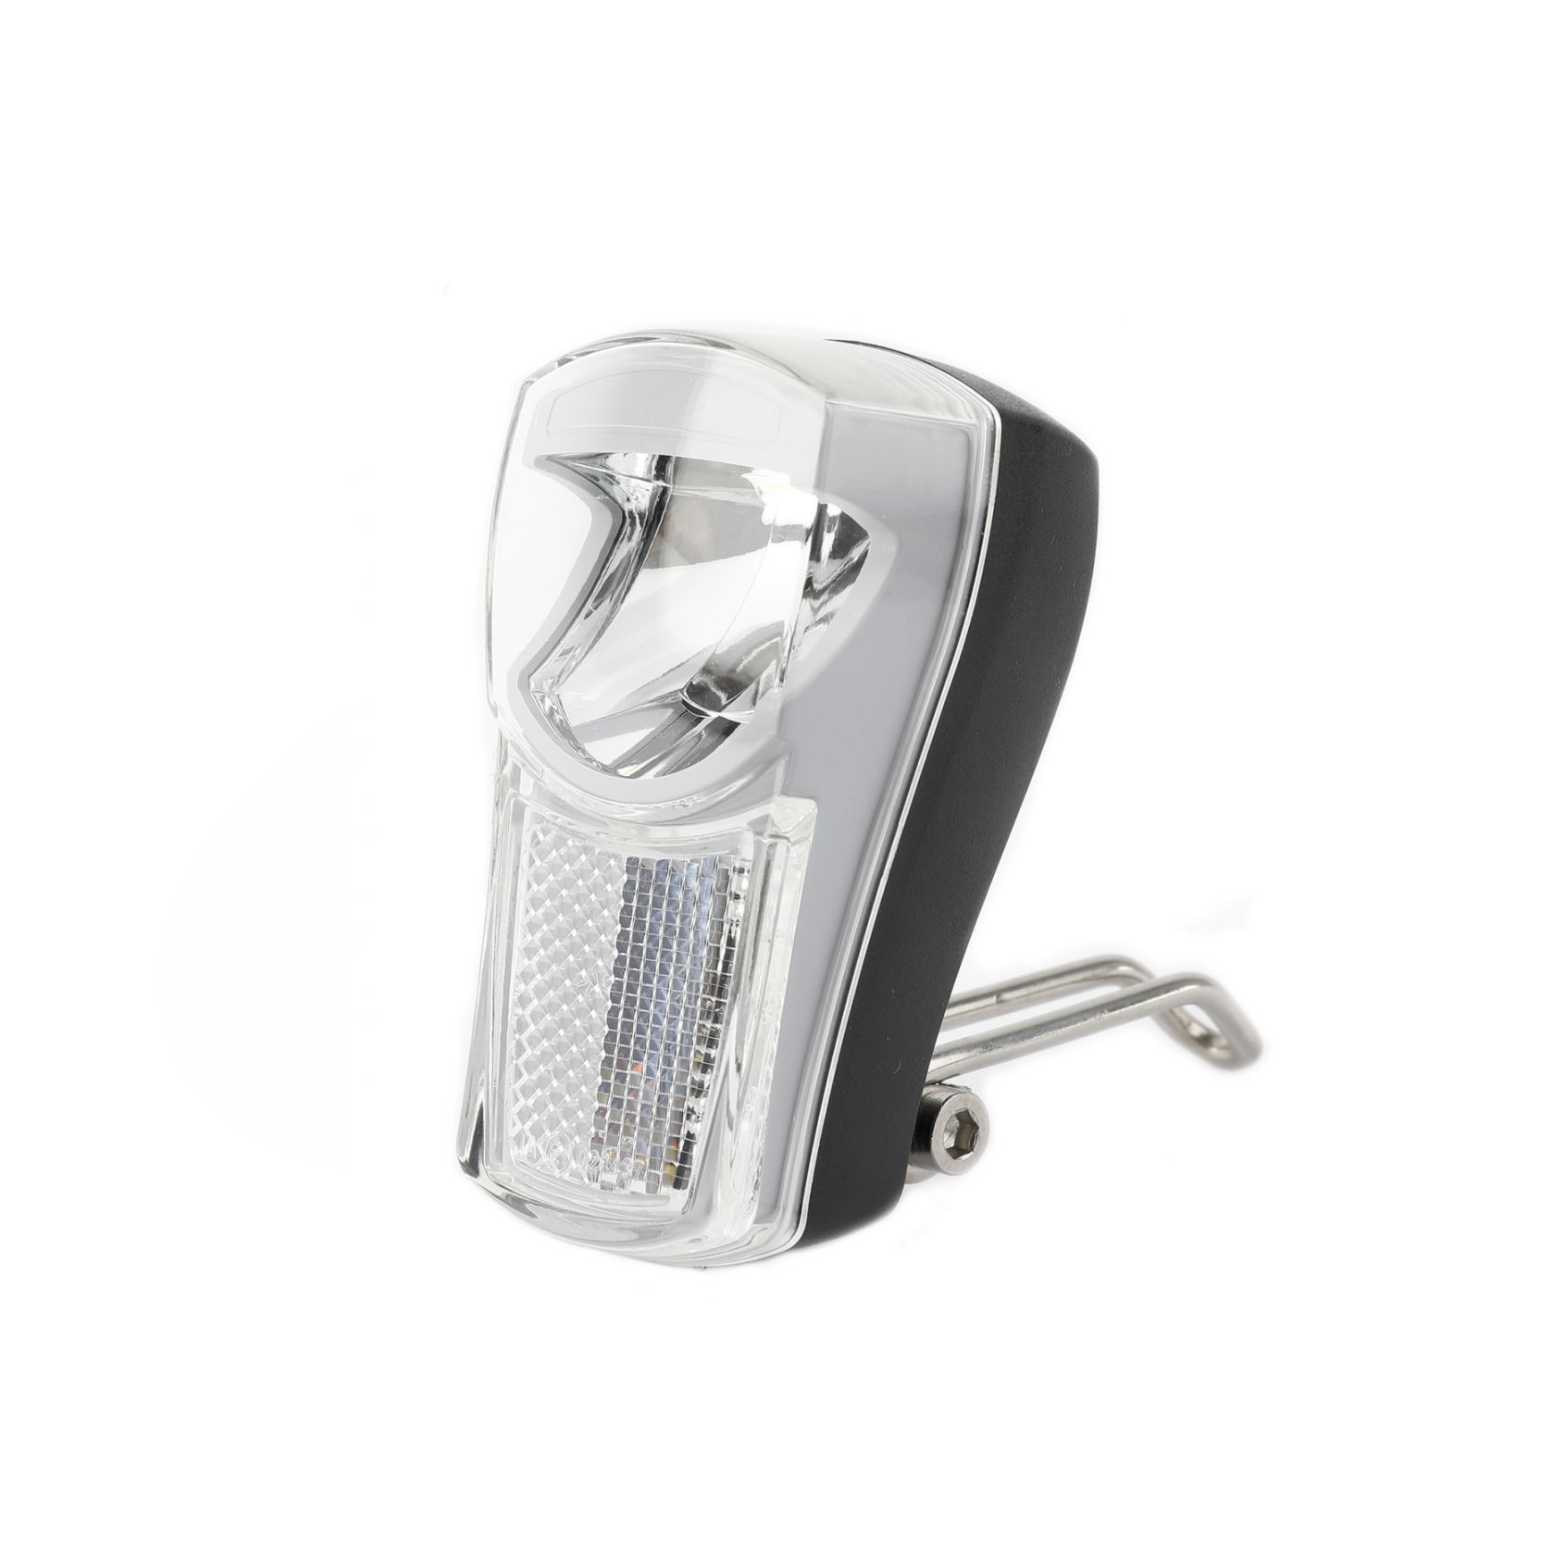 Ikzilight headlight The Boss, 1 white LED 20LUX. incl bracket and batteries (hang packaging)